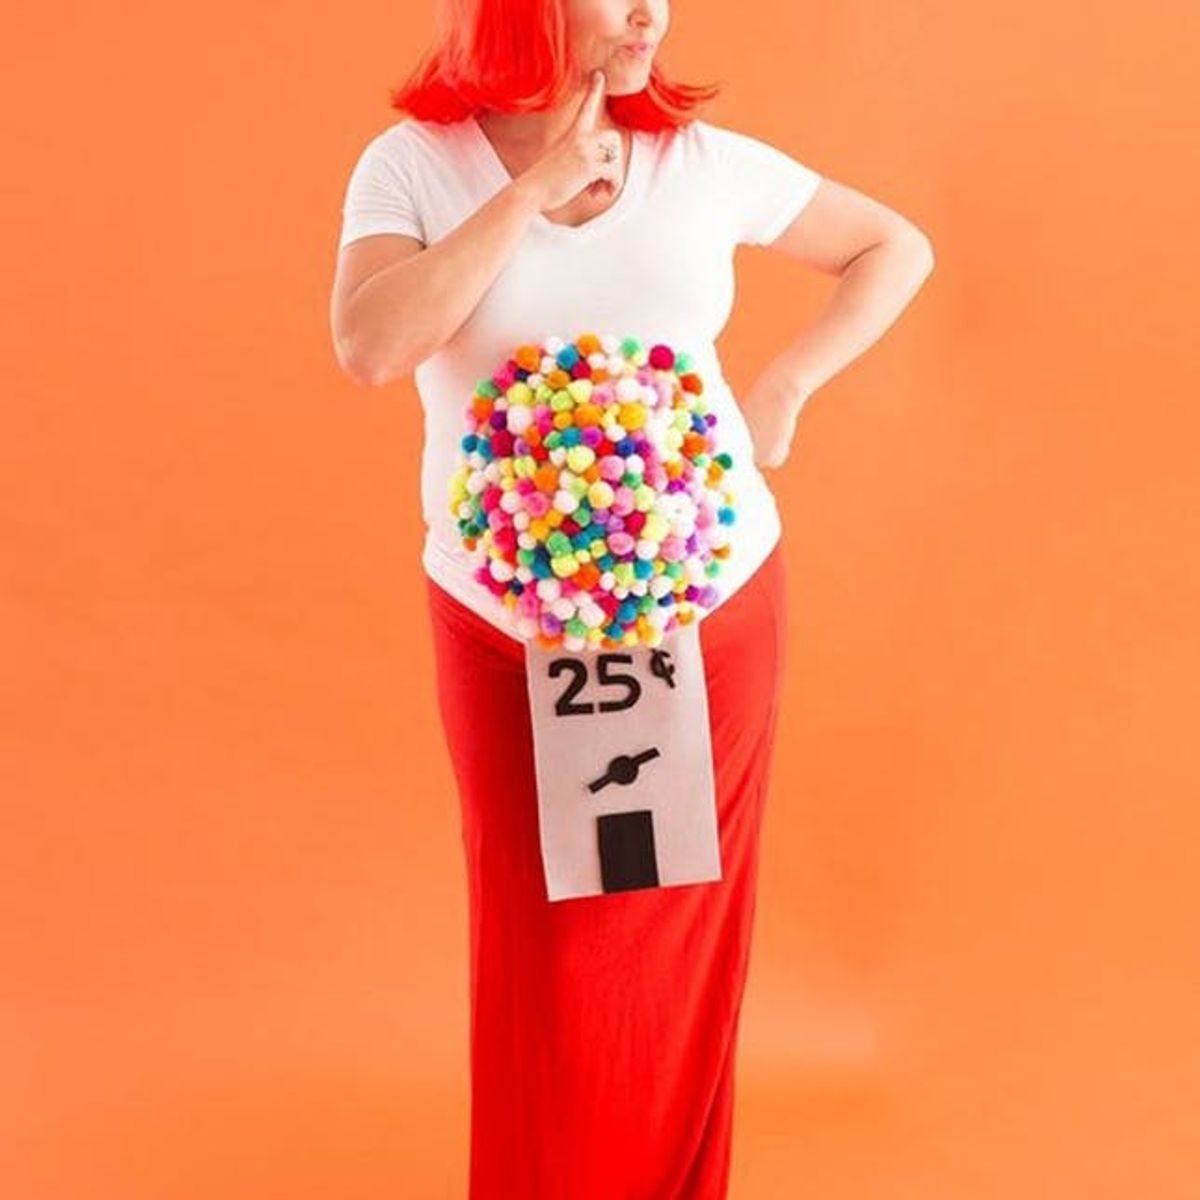 16 Pregnant Halloween Costumes You Can DIY